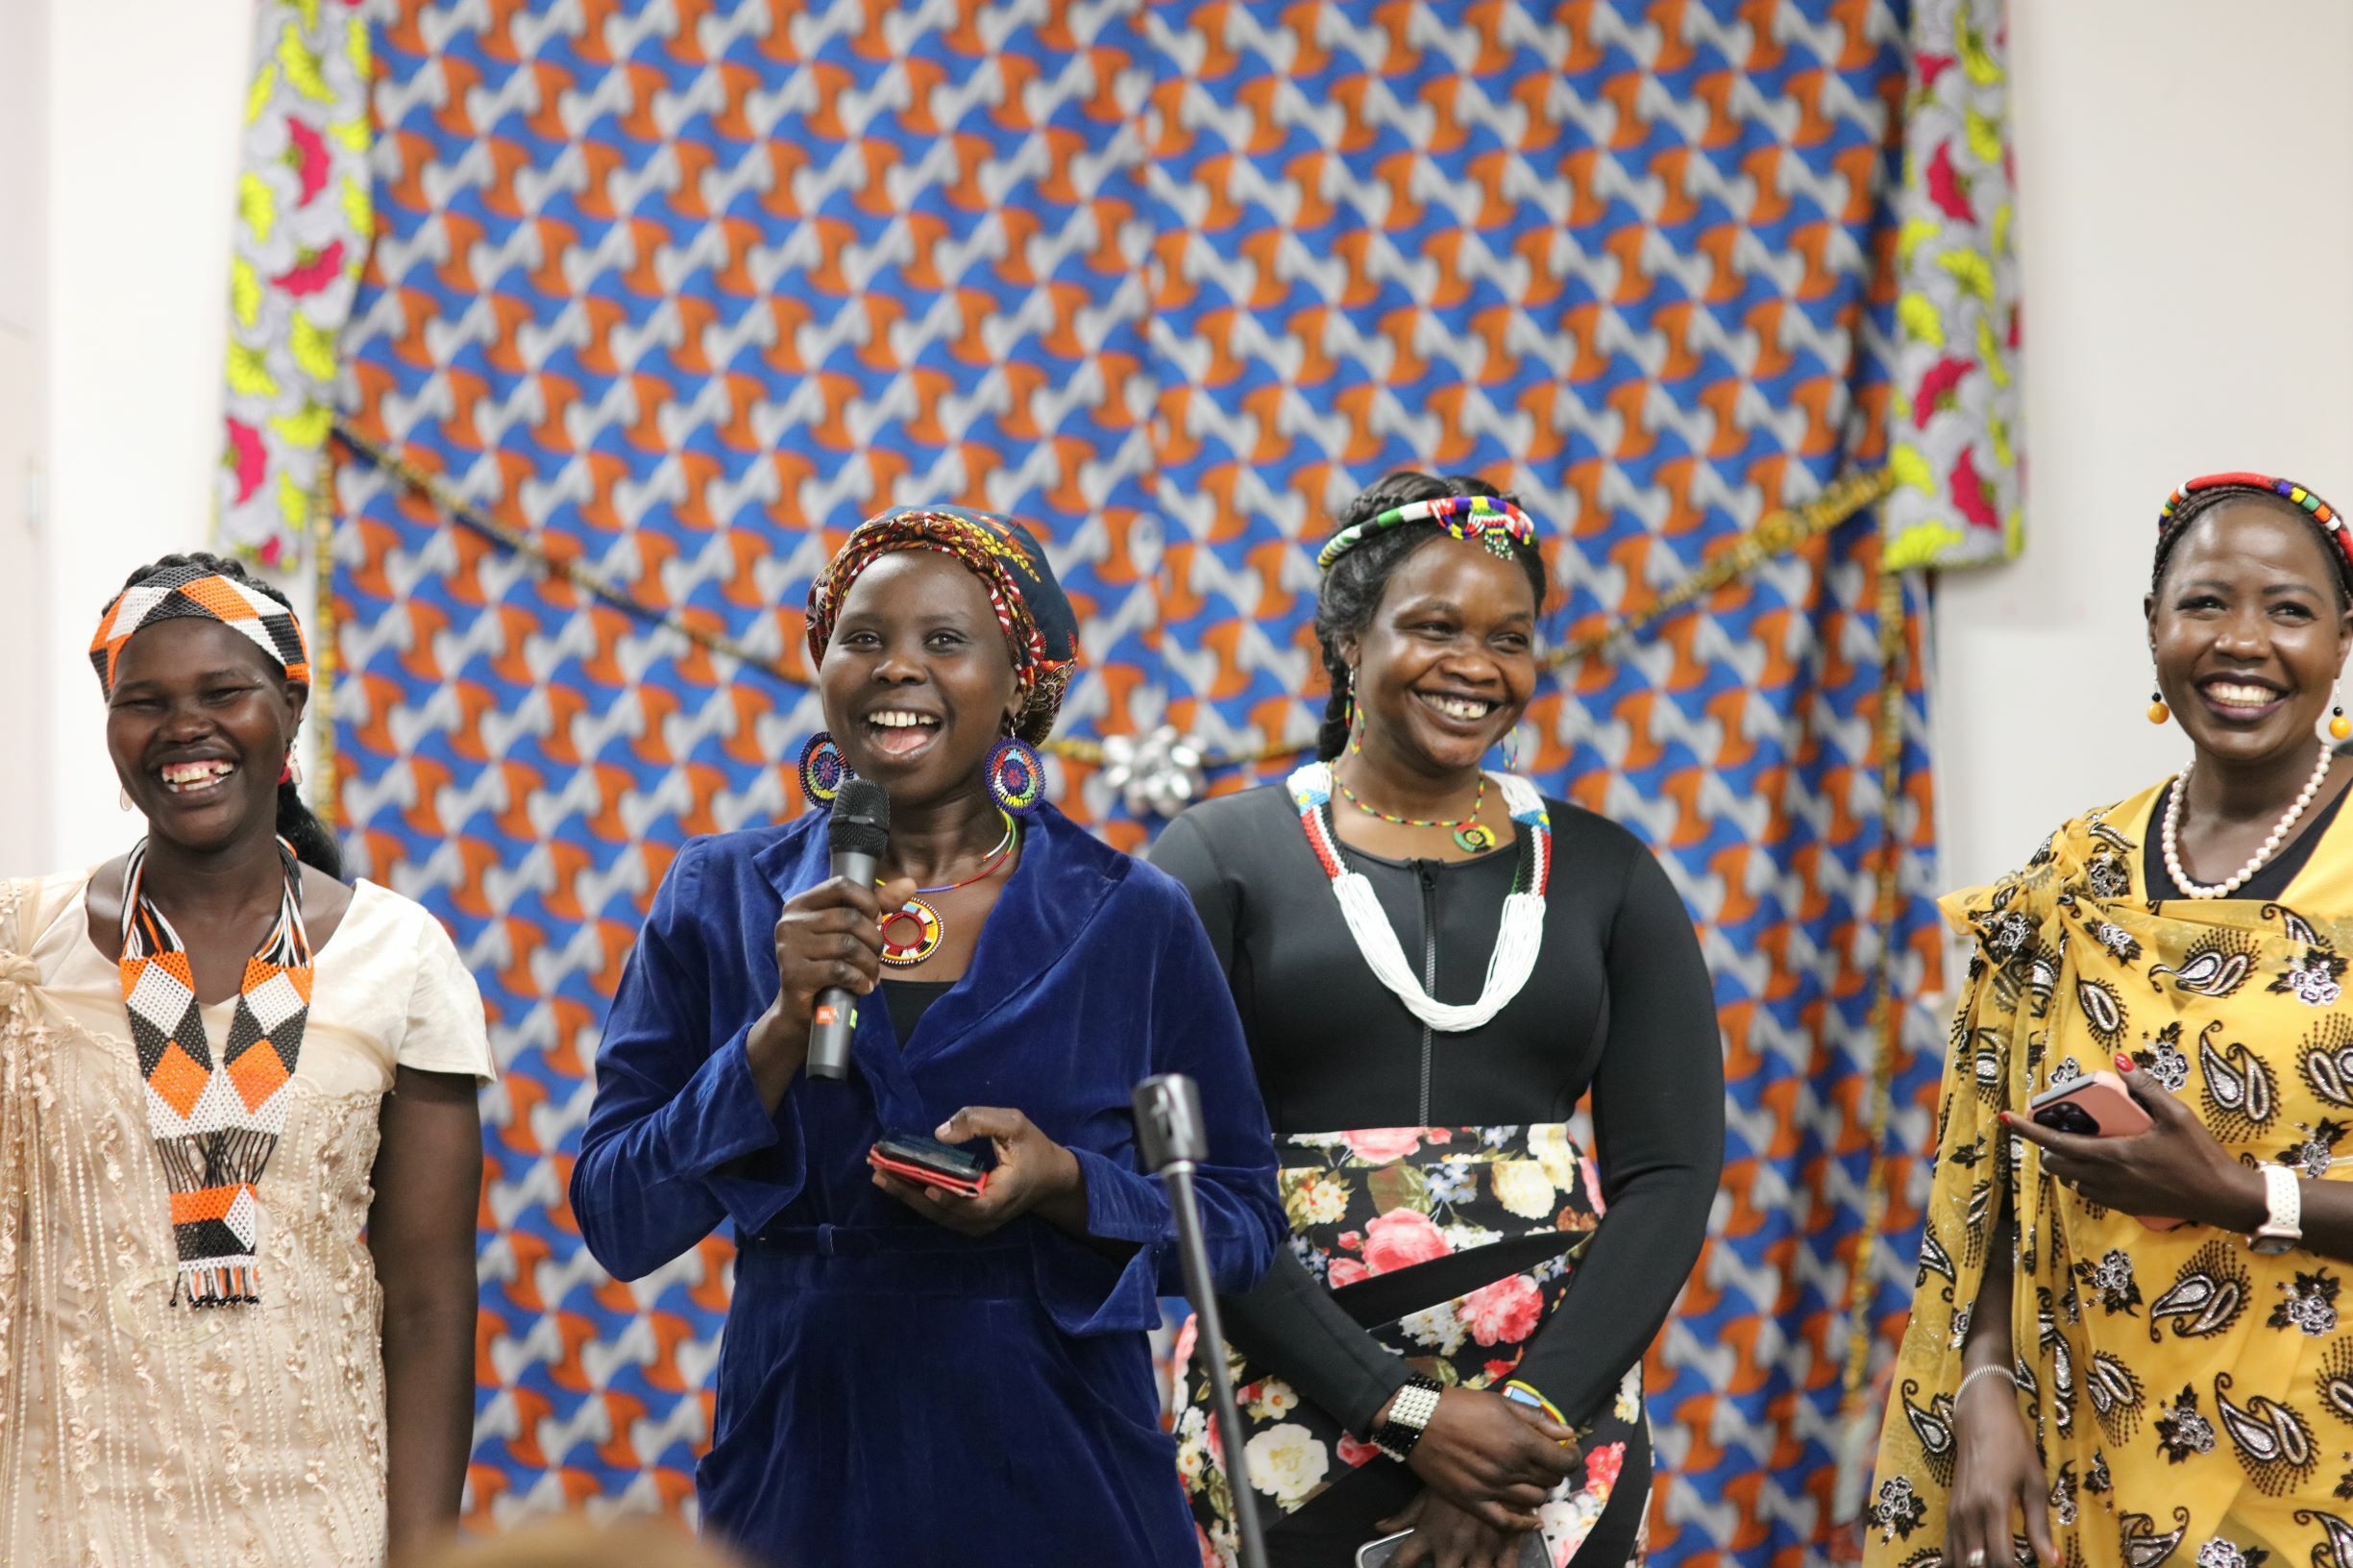 Women of the Well from left: Mary Deng, Nyibol Deng, Martha Chol and Mary Top They are standing in front of a colourful curtain and smiling.